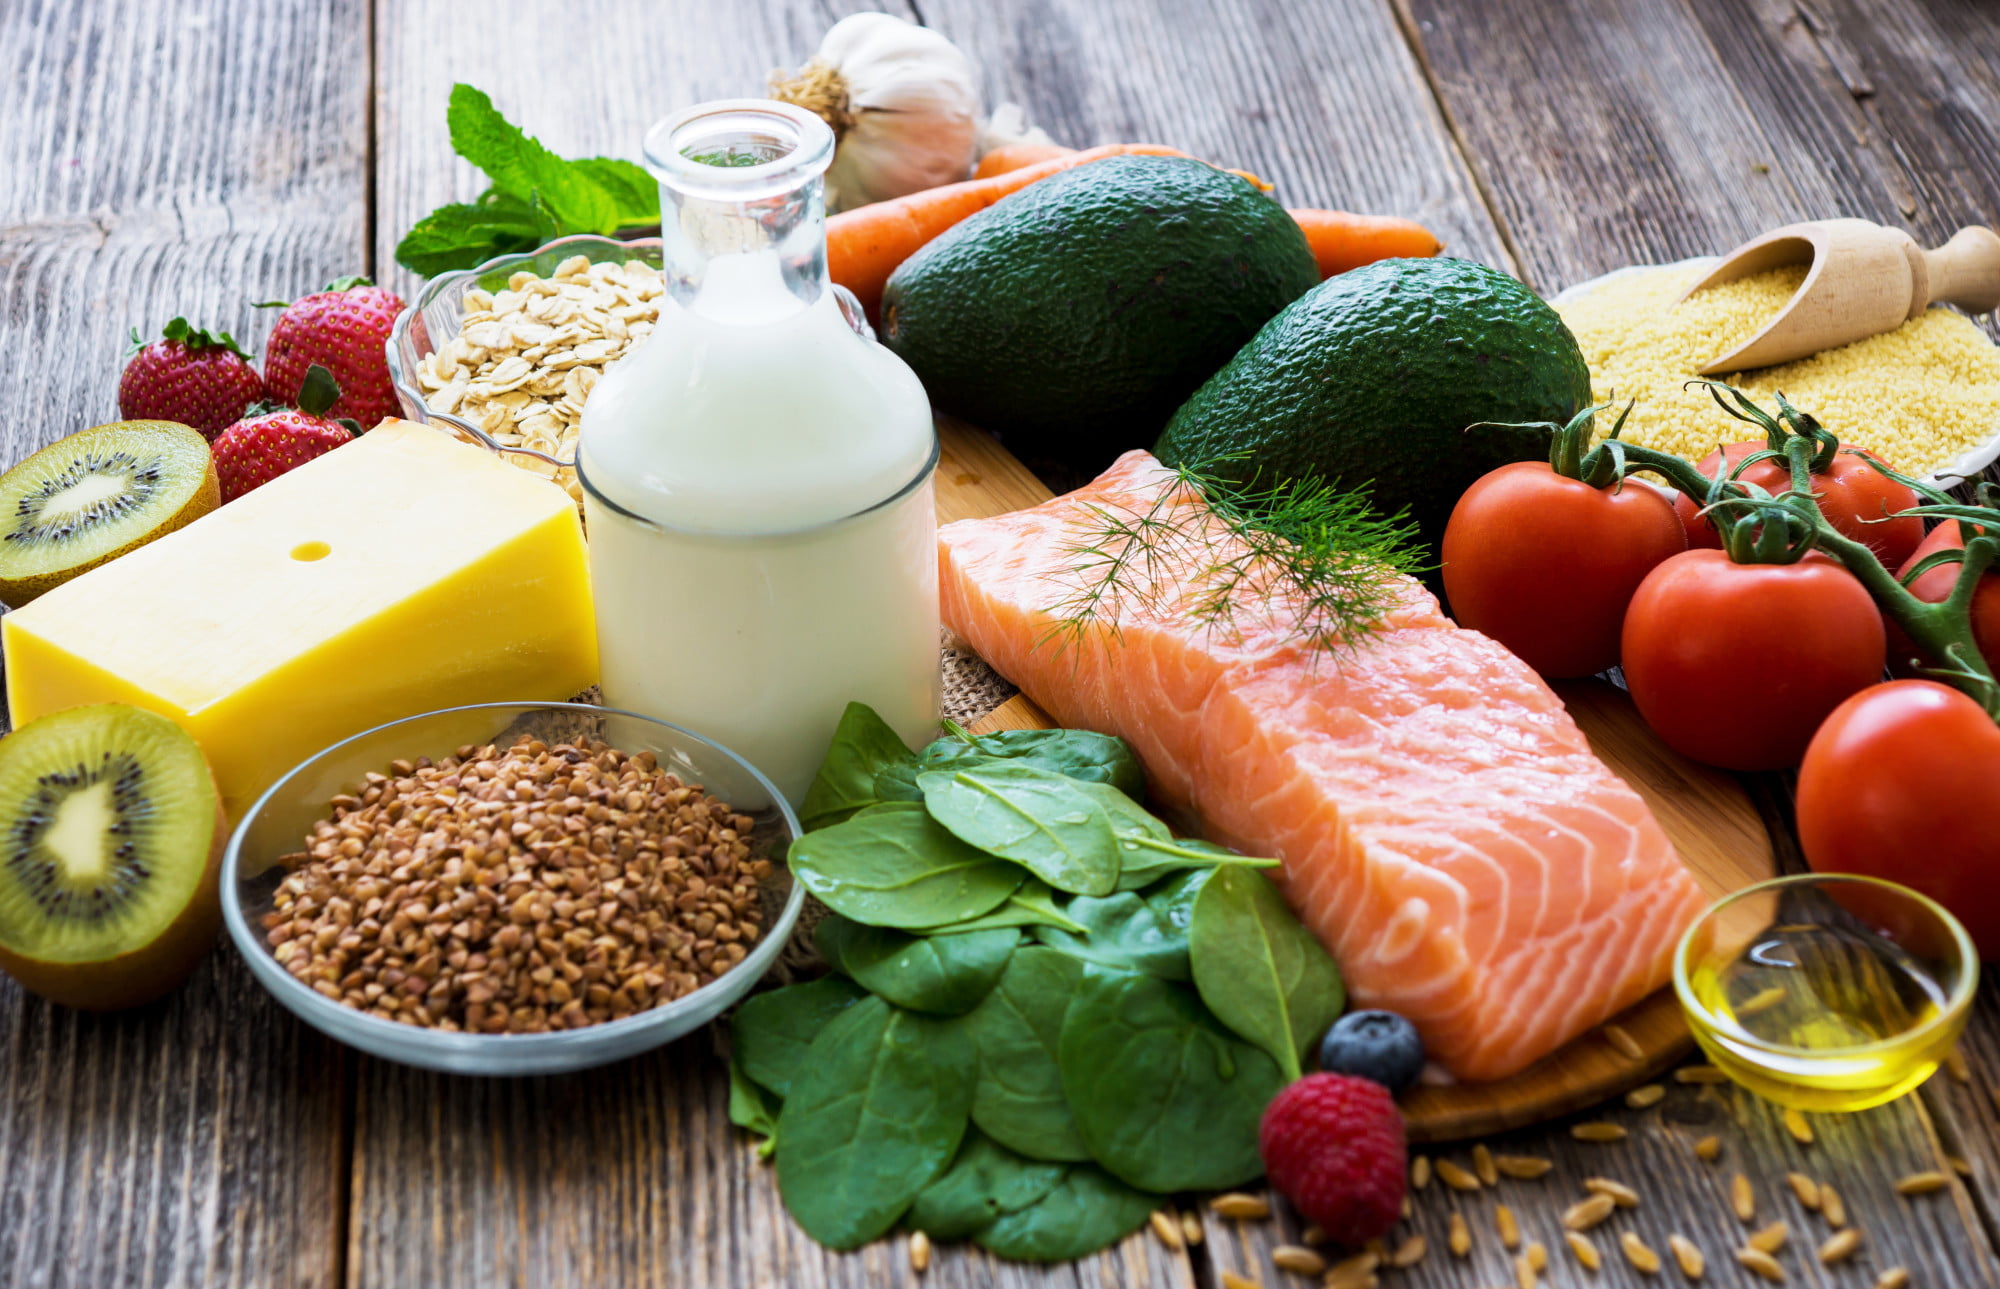 Here are the best foods for the brain you should be adding into your daily routine! Click to learn the diets that feed our brain and help improve function.